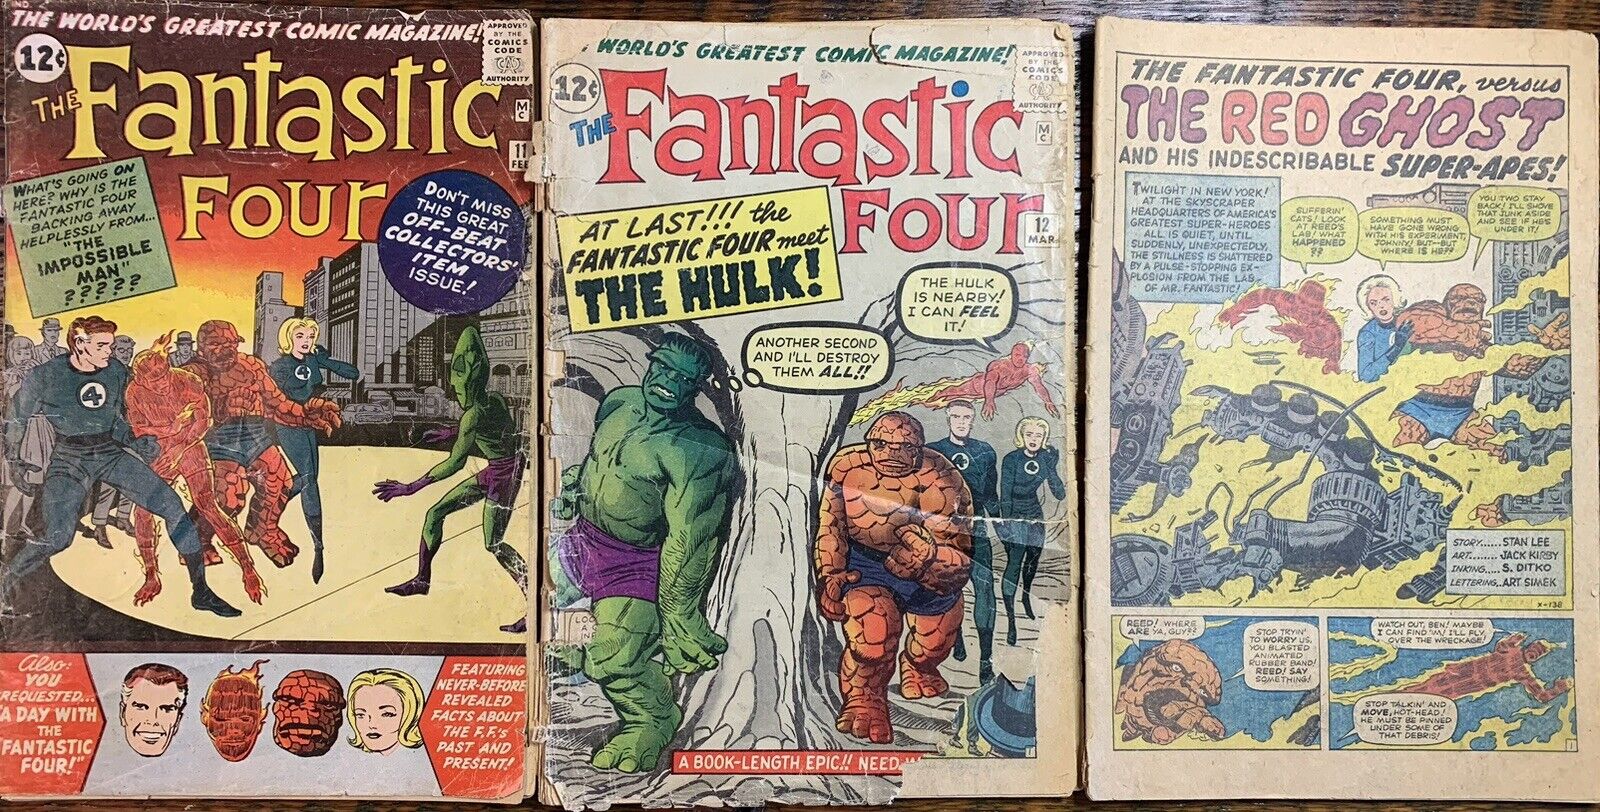 Fantastic Four 11 12 13 (3 Book Lot) Marvel 1962 Low Grade Coverless